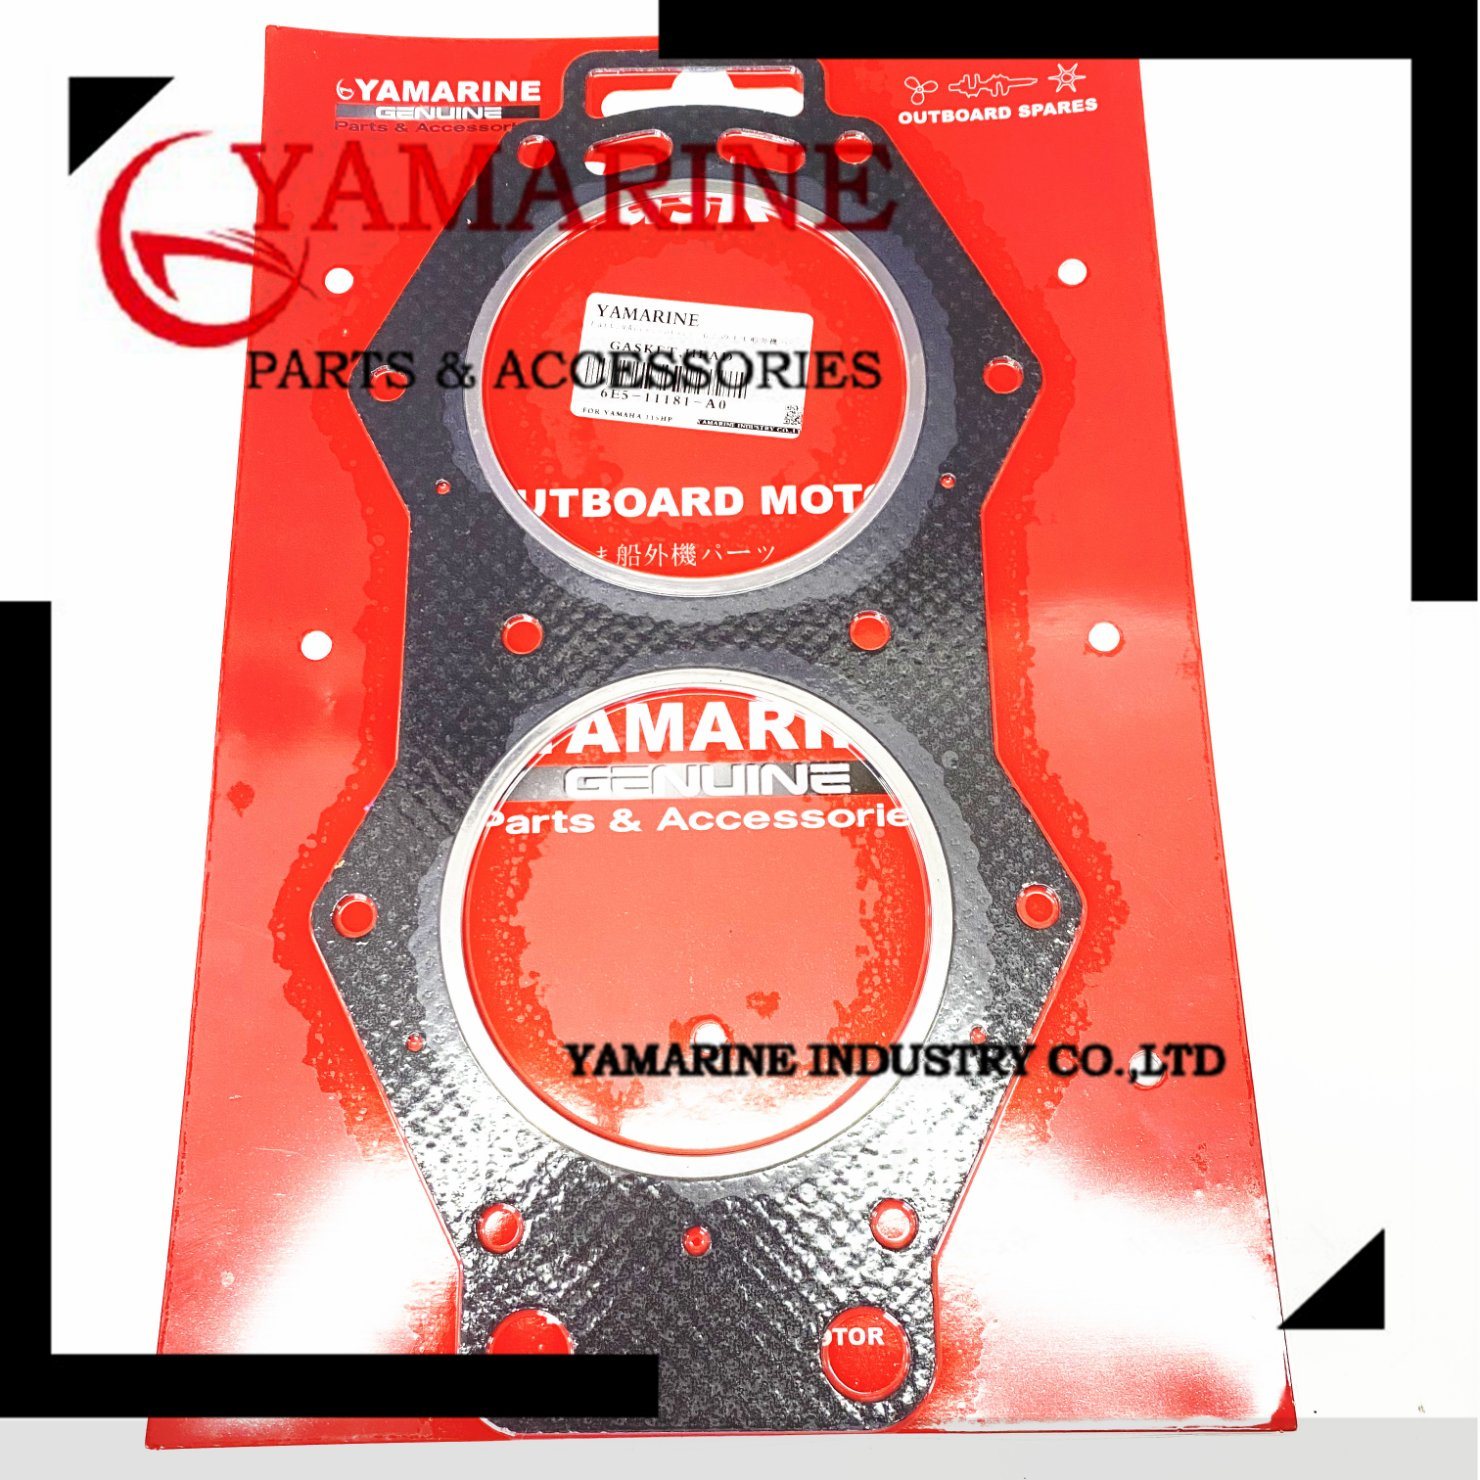 66t-11181-A2 Cylinder Head Gasket for YAMAHA 40HP 40X E40X Outboard Engine, 66t-11181-00